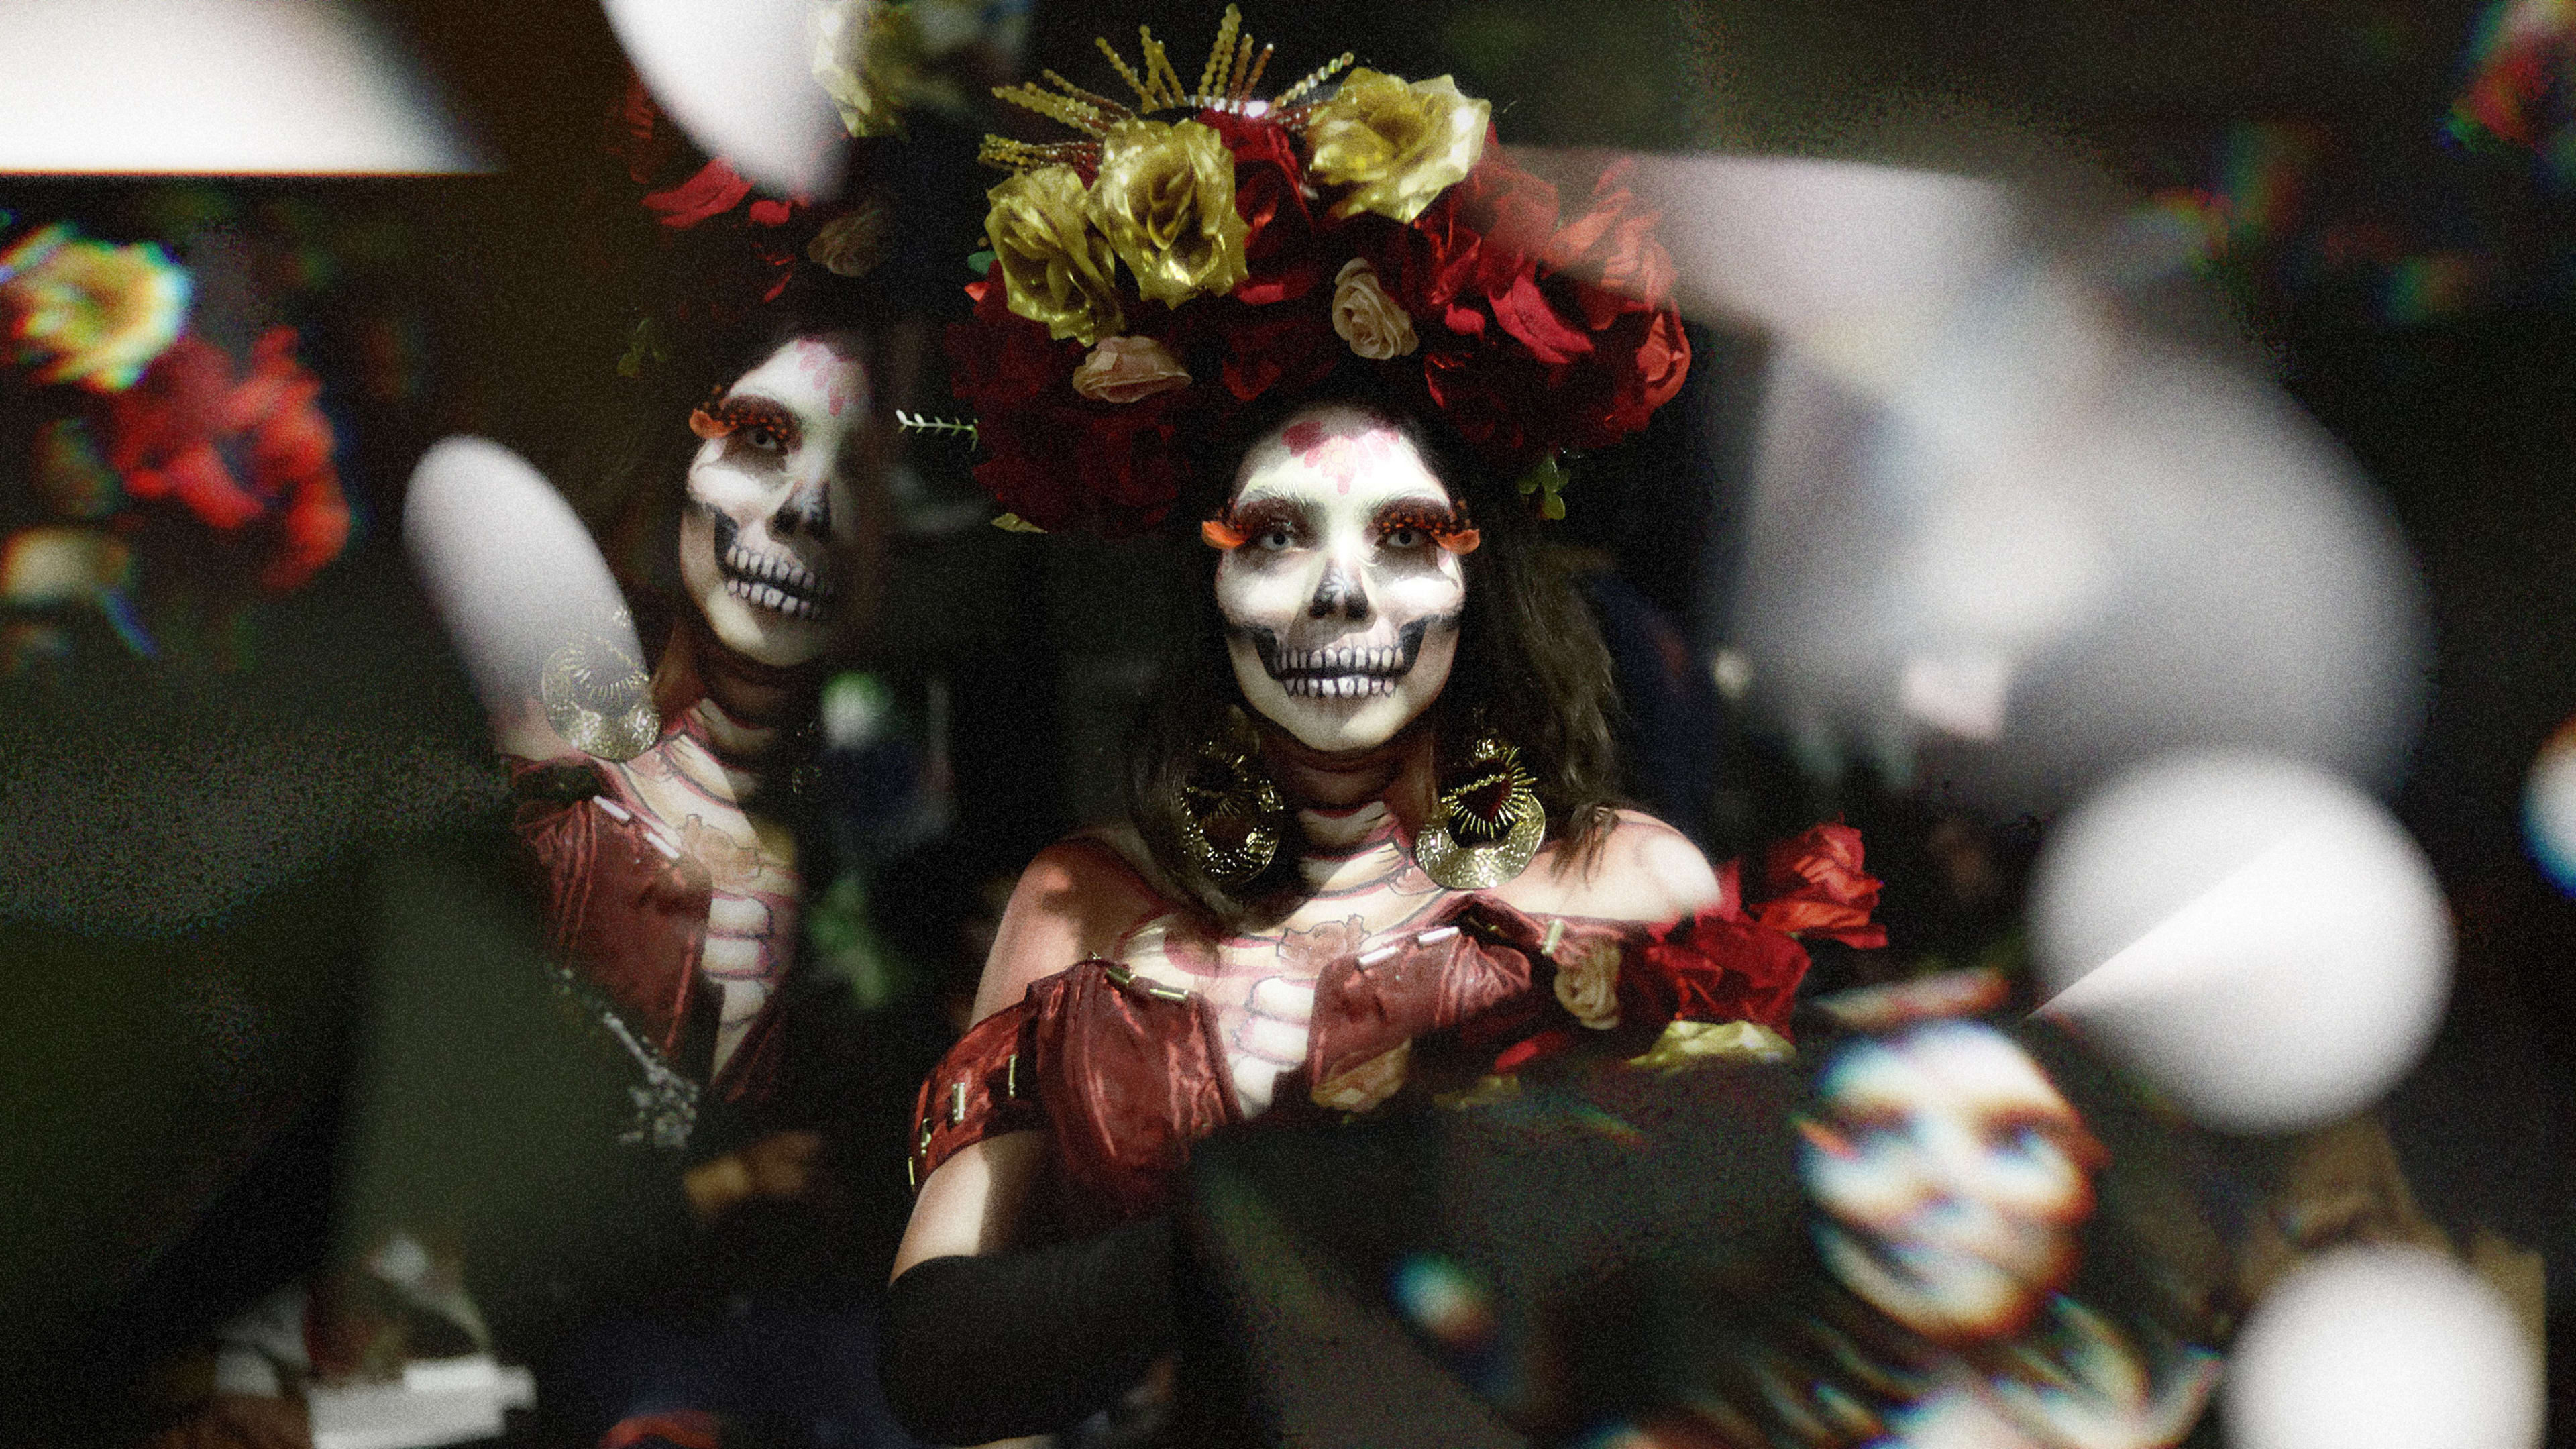 How the skull became the iconic symbol of Day of the Dead